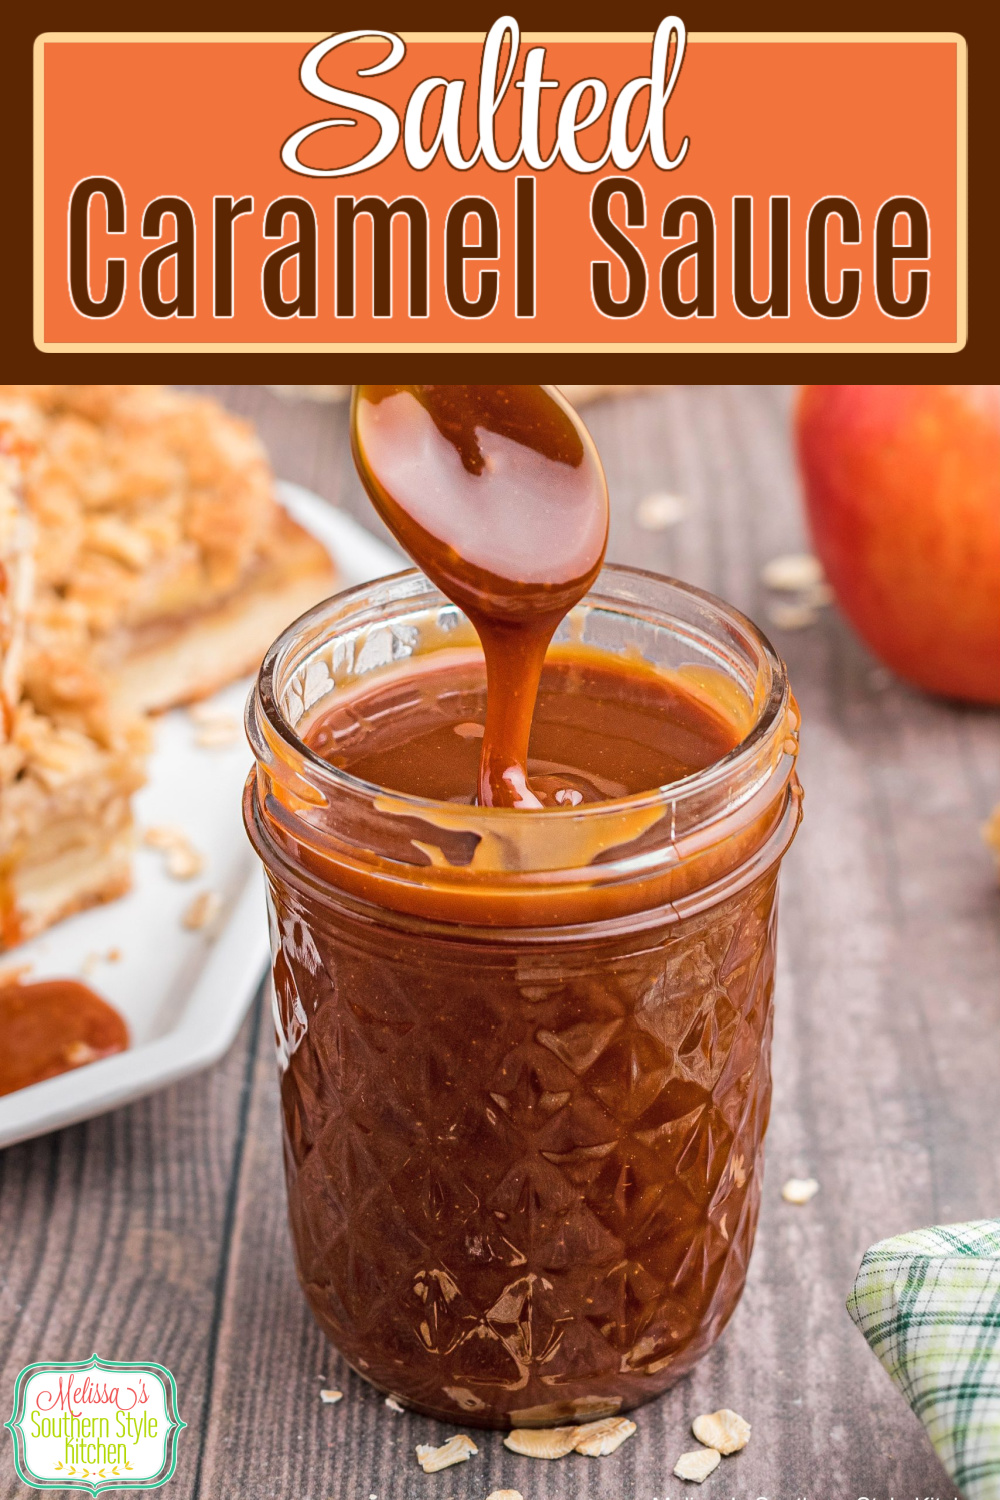 This Salted Caramel Sauce Recipe can be drizzled on ice cream, cake, used as a dip for cookies and fresh fruit or as a glaze for doughnuts #saltedcaramel #caramelrecipes #saltedcaramelsauce #caramelsauce #icecreamtoppings #carameldesserts via @melissasssk